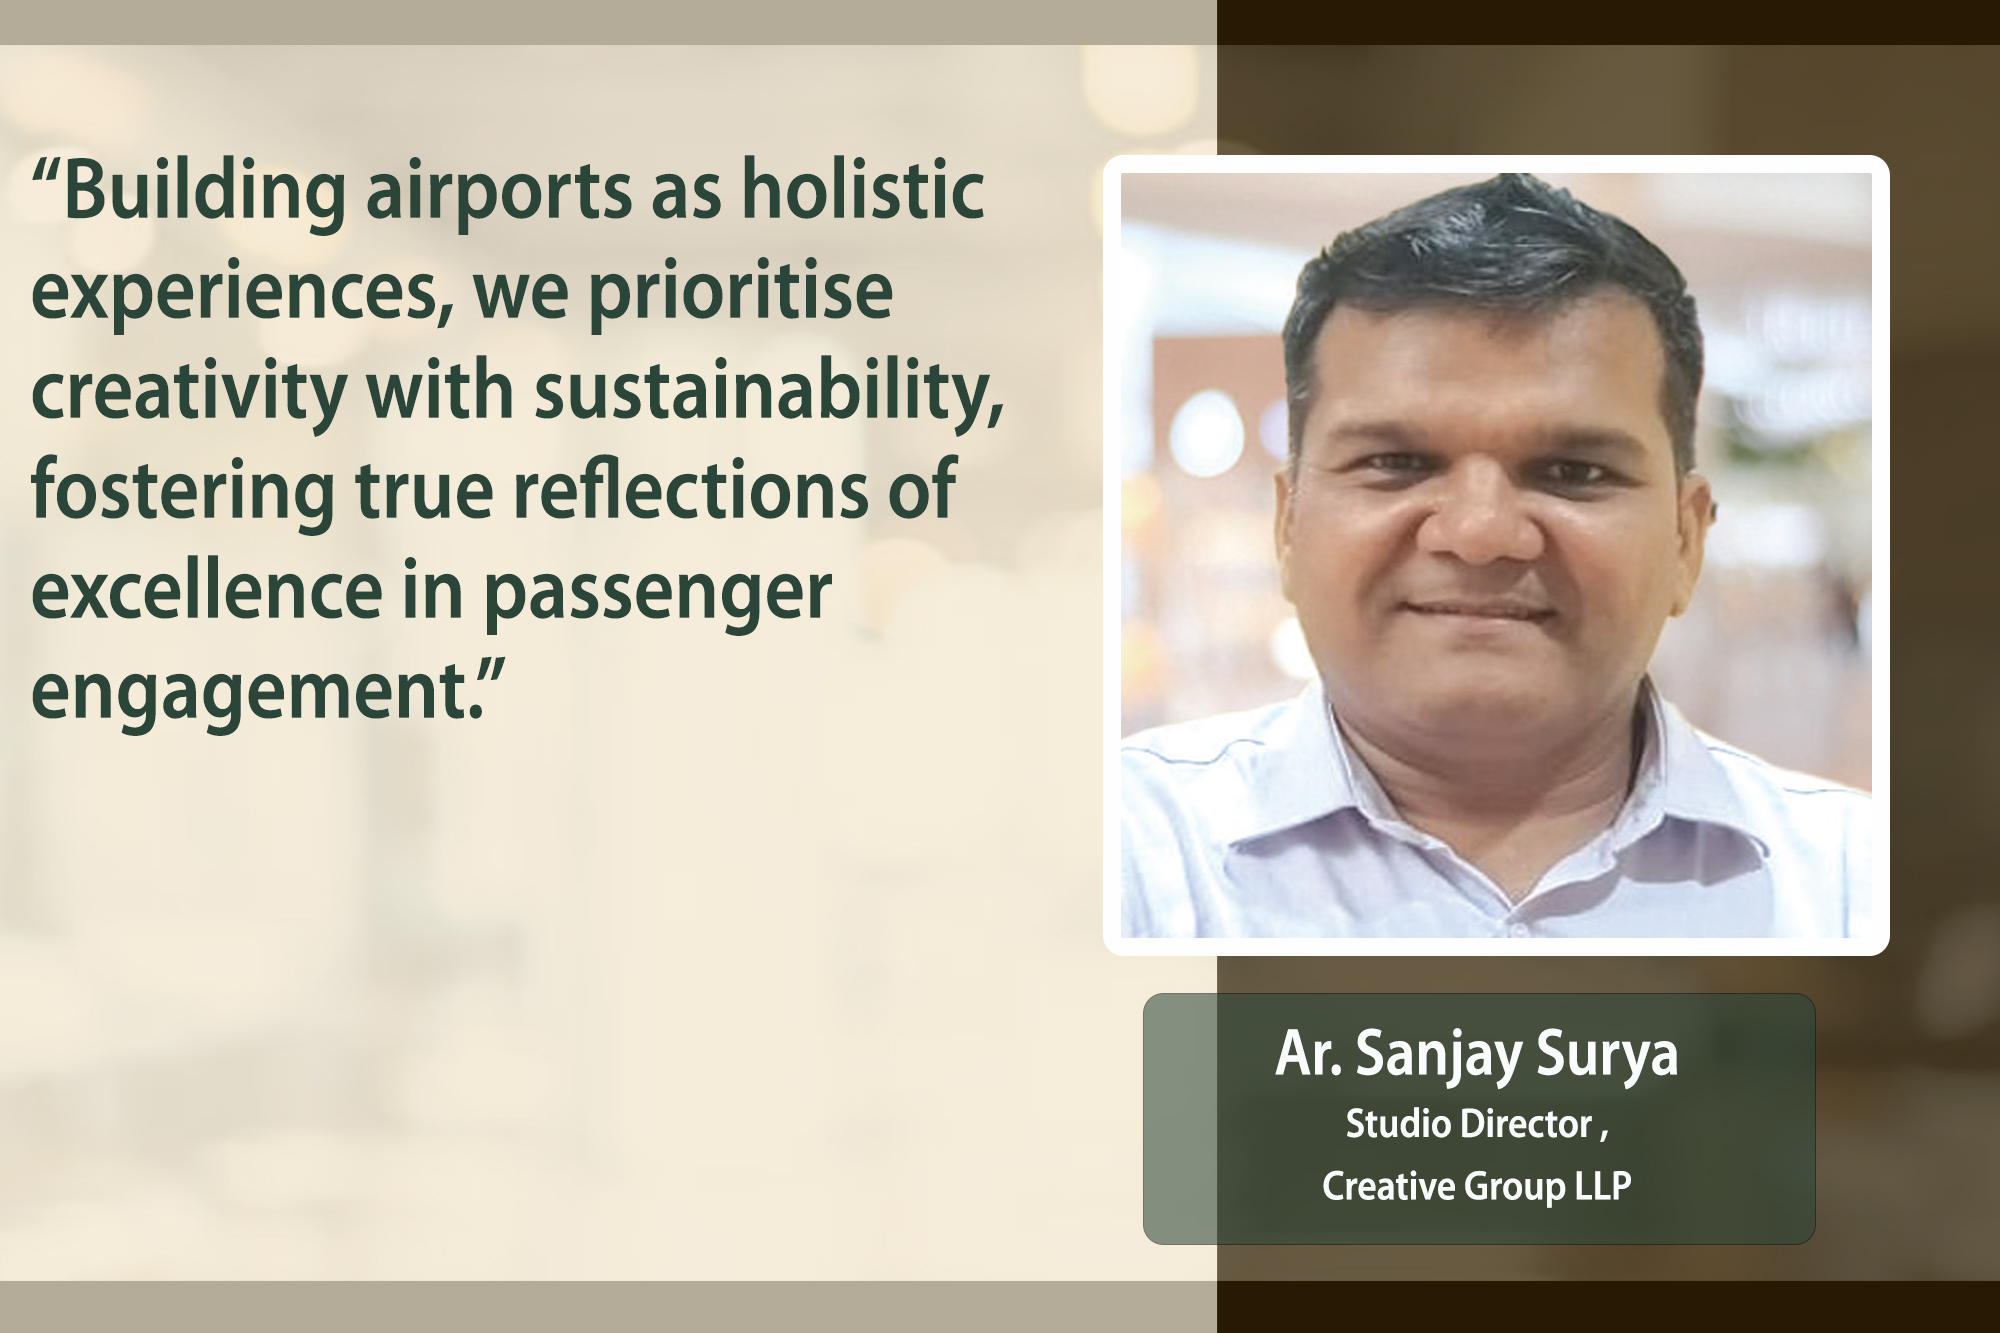 The fusion of creativity and technology in airport transformation